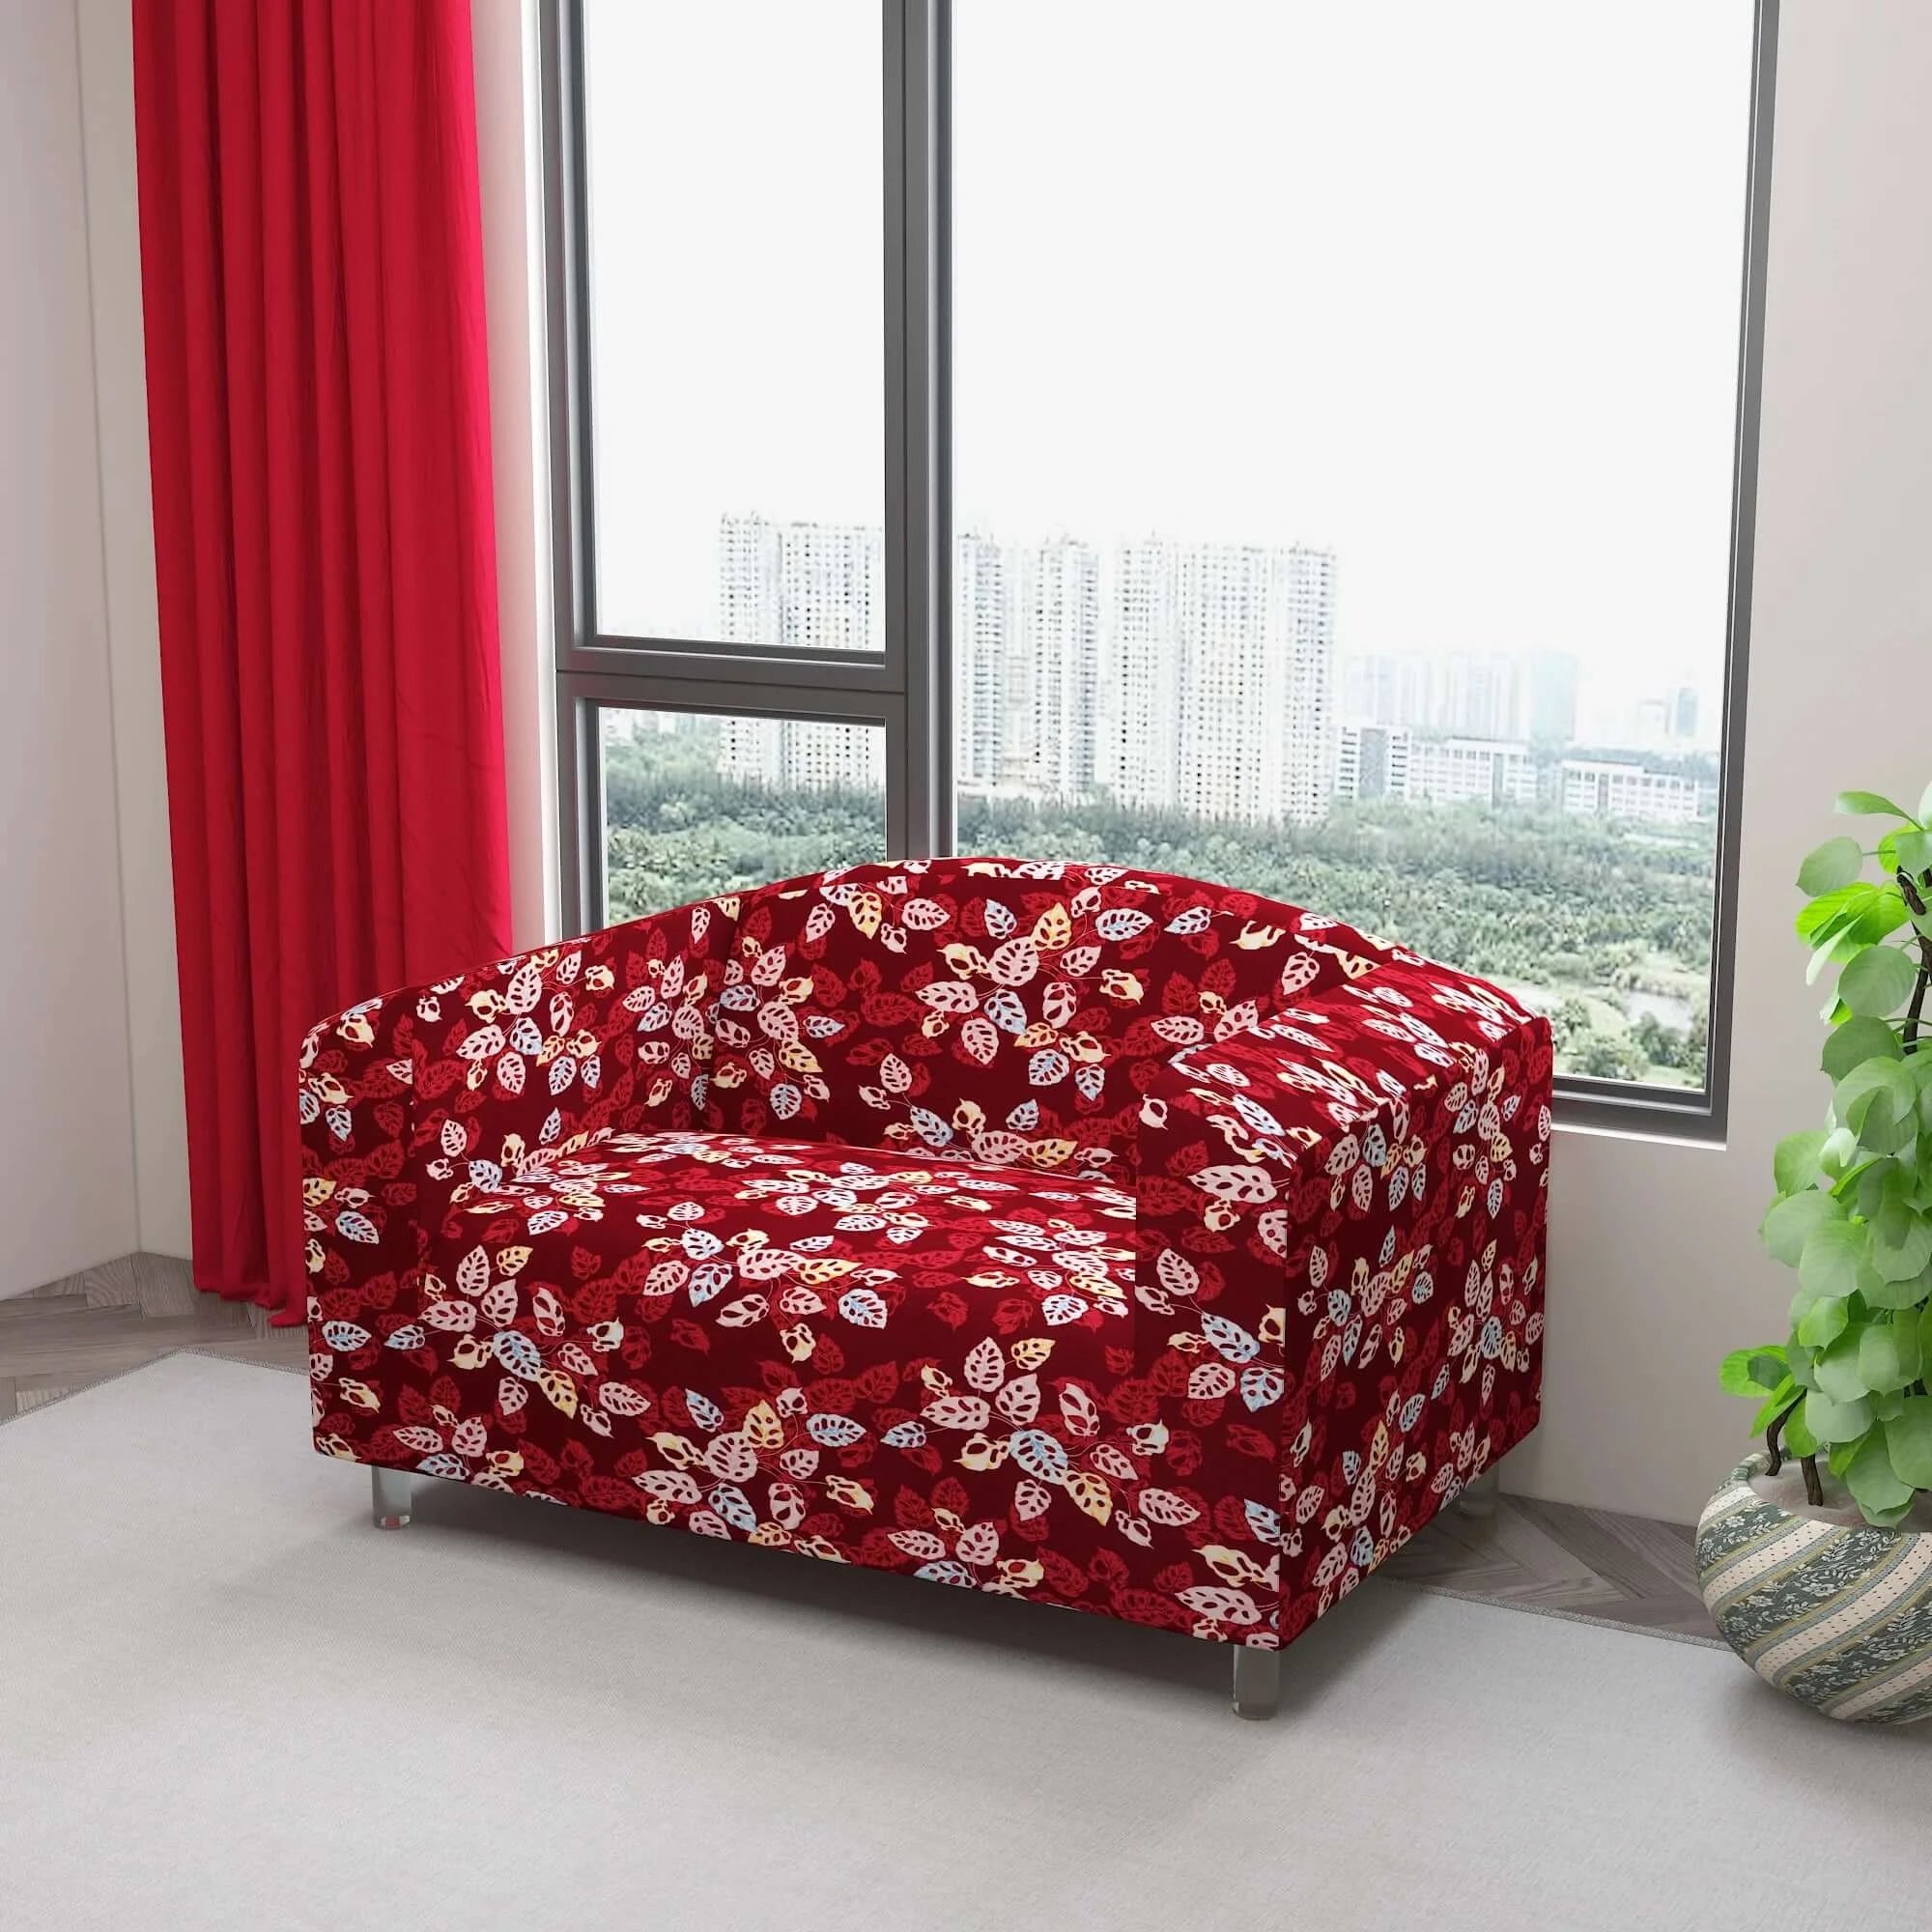 Marigold Printed Sofa Protector Cover Full Stretchable, MG03 - Dream Care Furnishings Private Limited